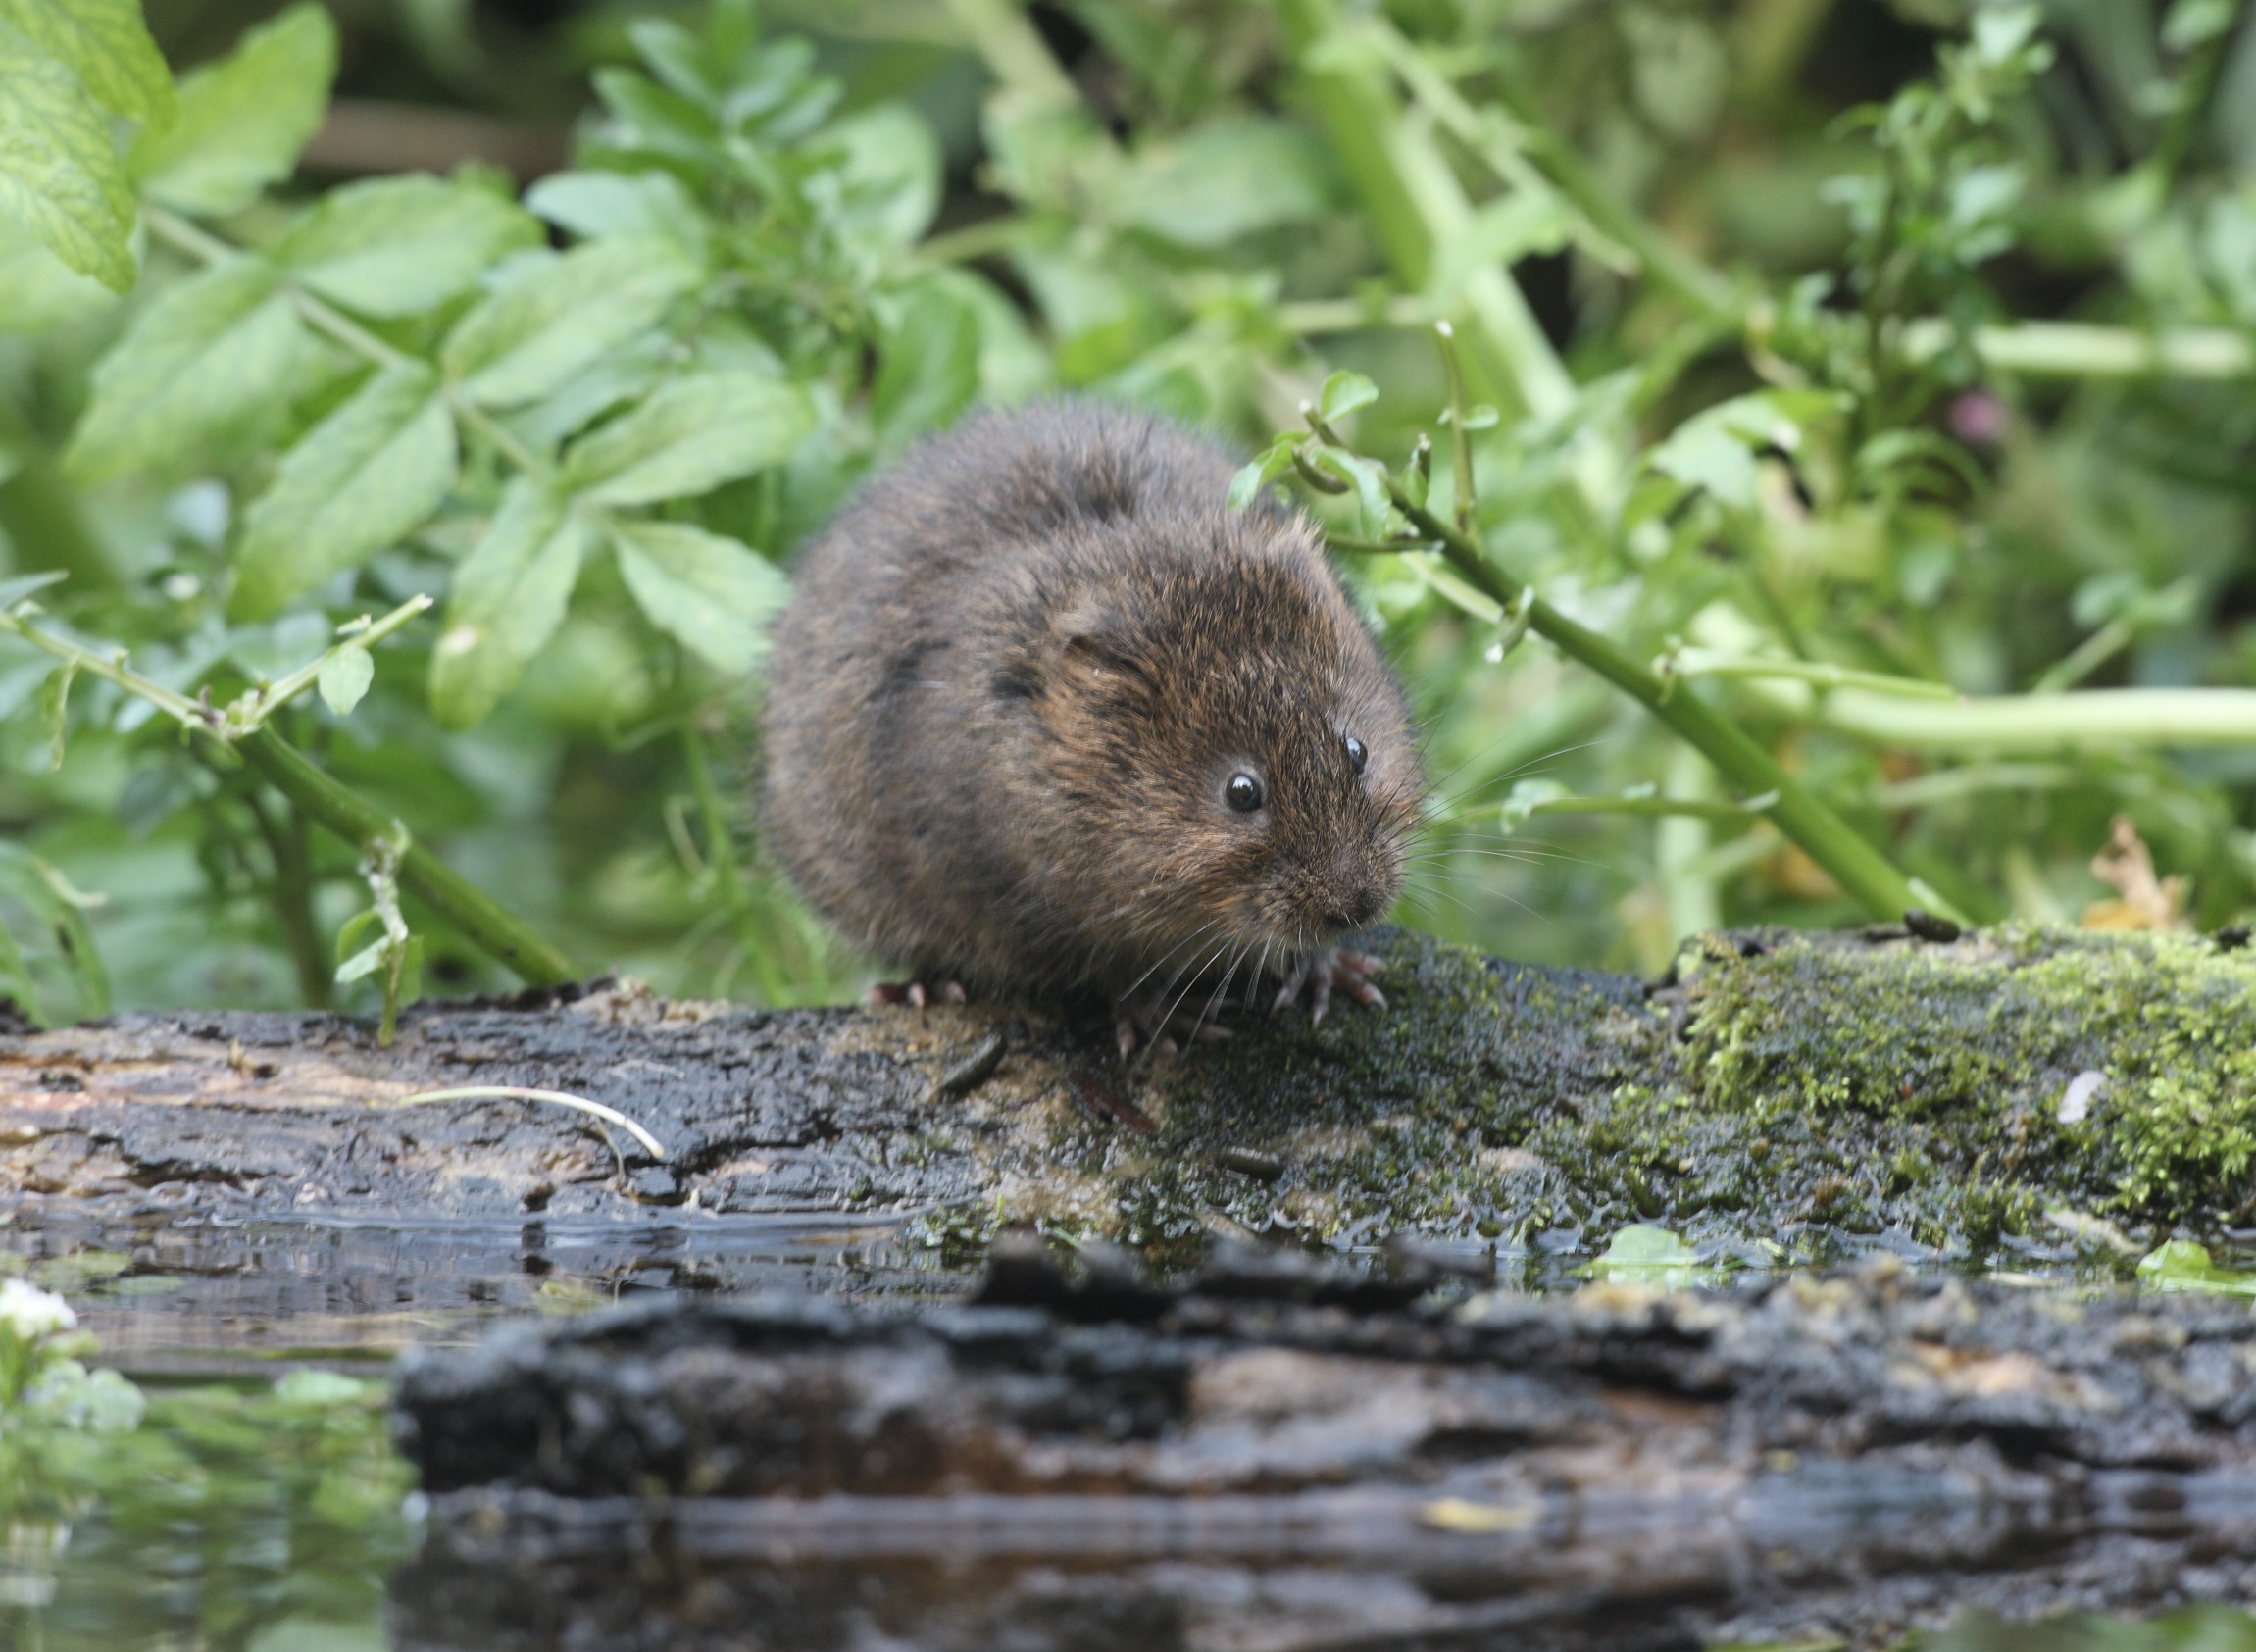 Water vole by Mike Lane